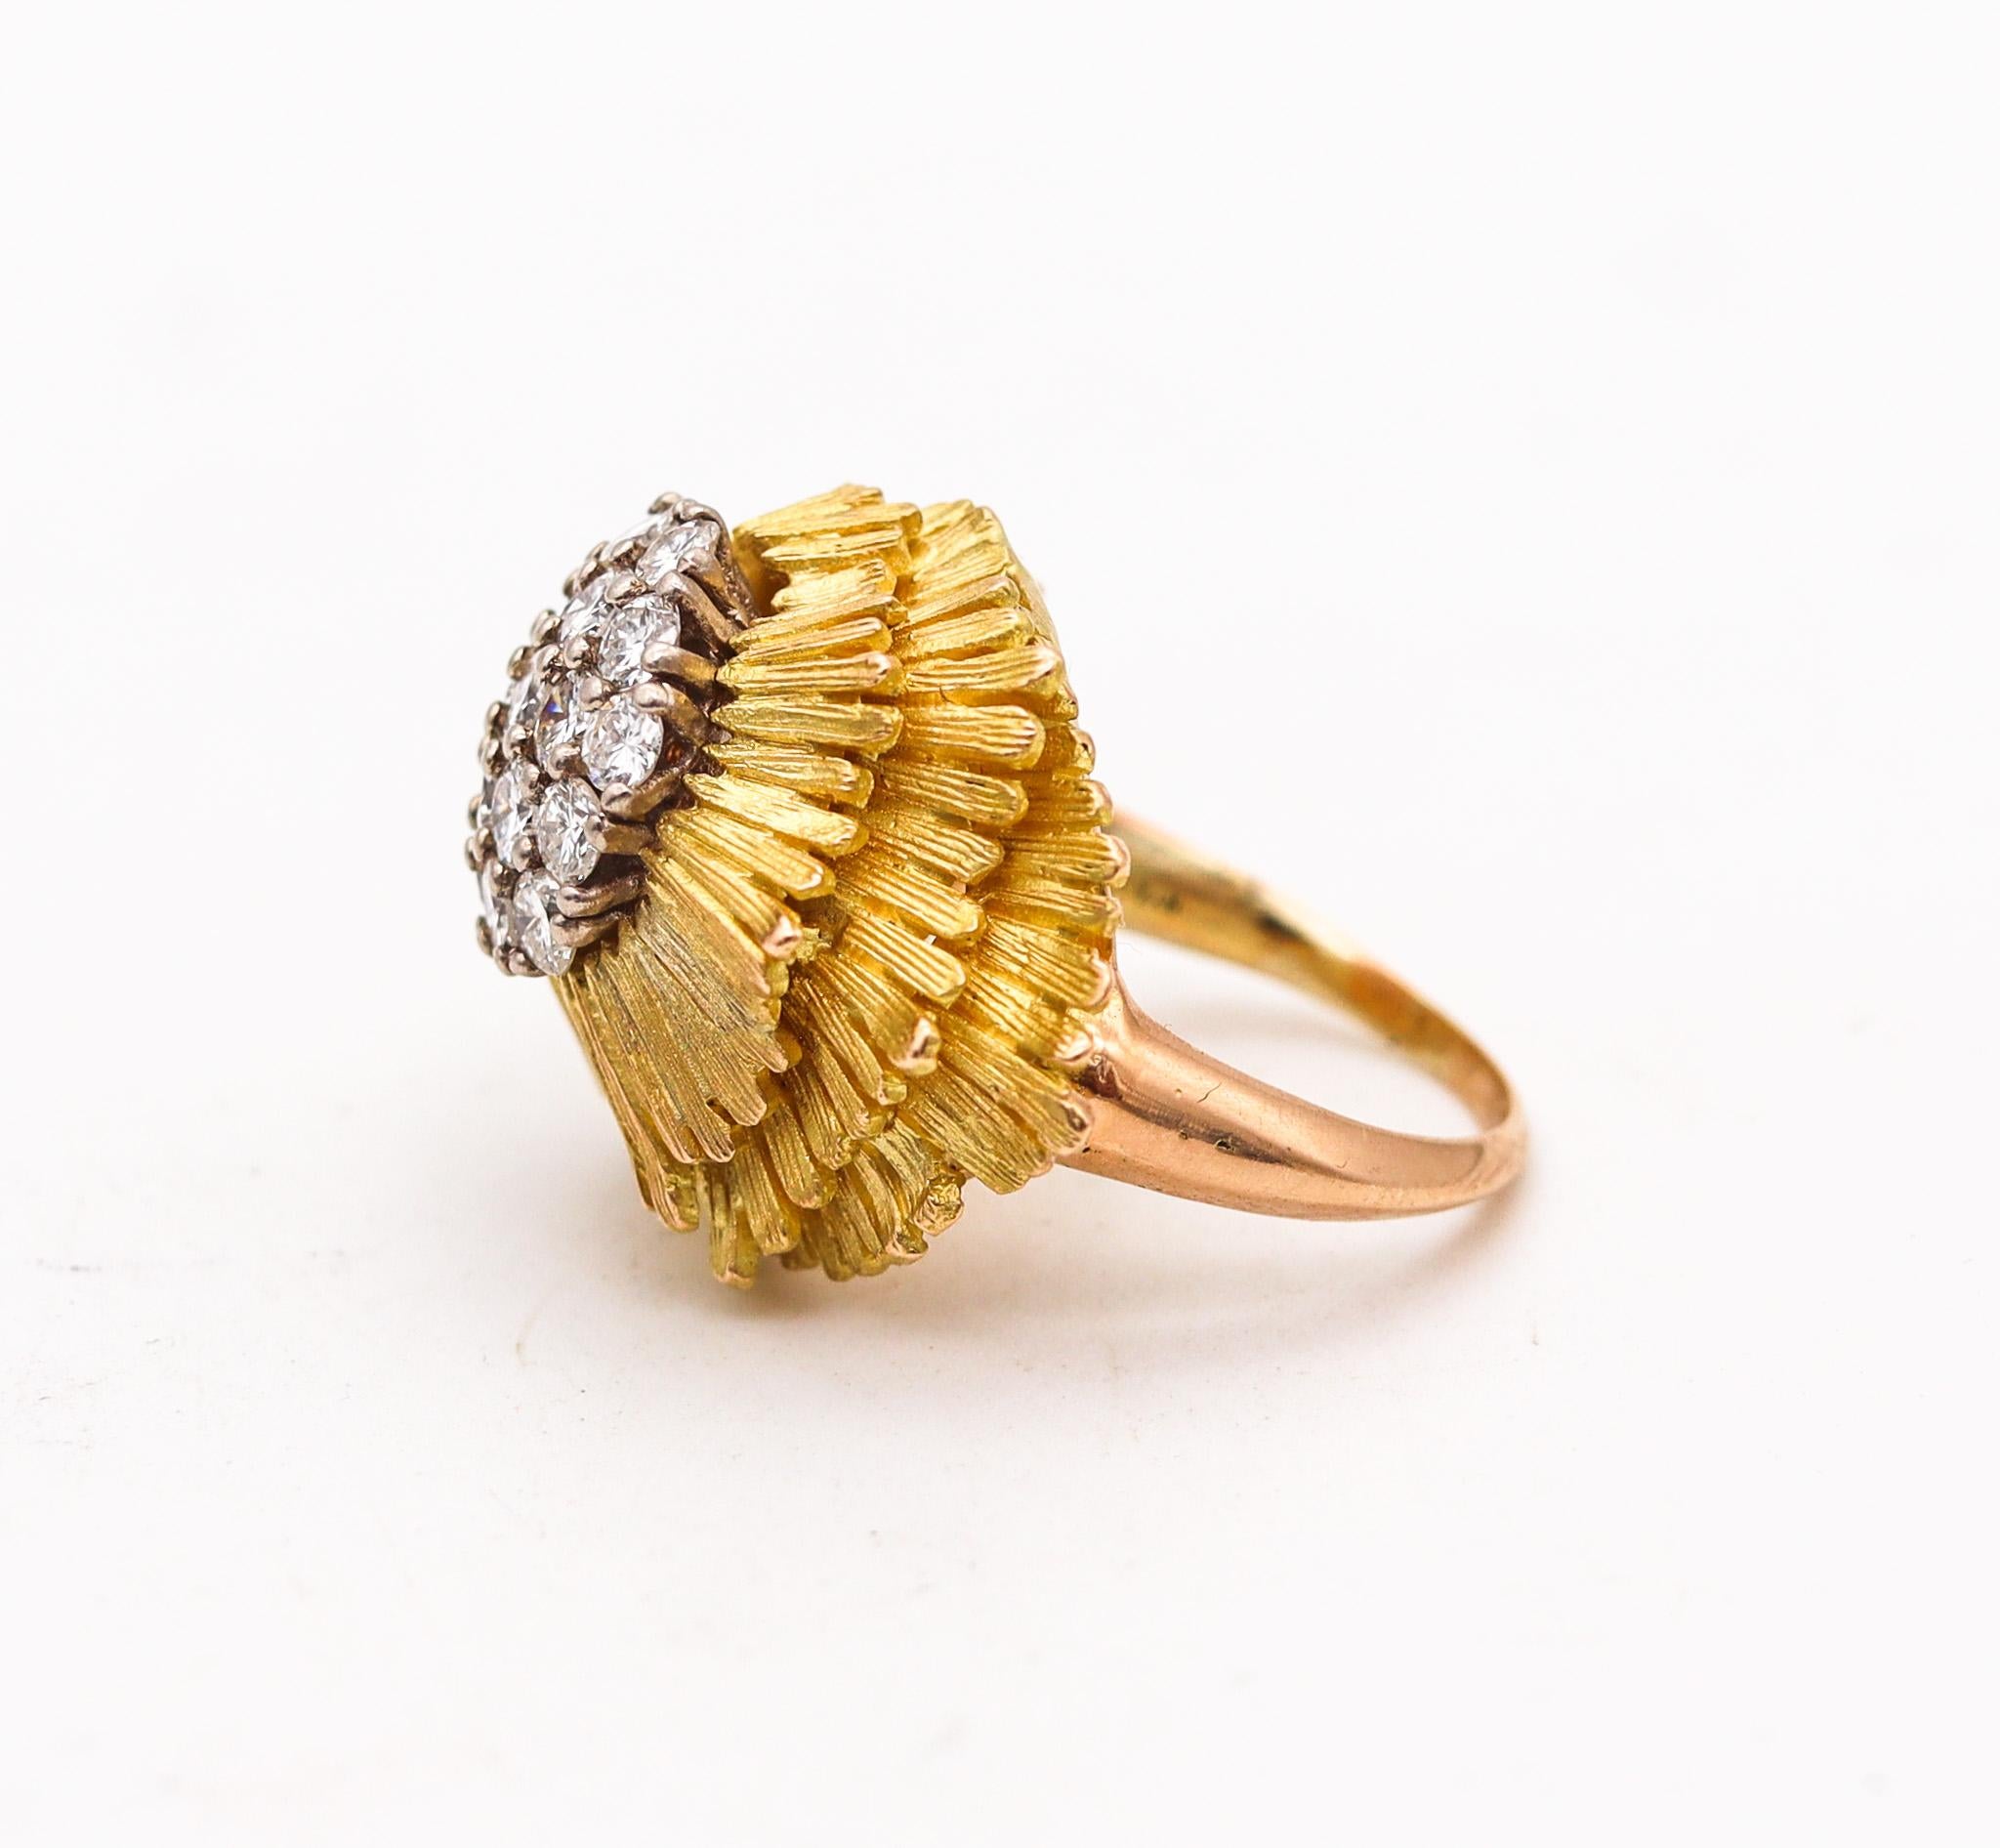 Modernist Tiffany & Co. 1960 Cluster Cocktail Ring In 18Kt Gold With 1.74 Ctw In Diamonds